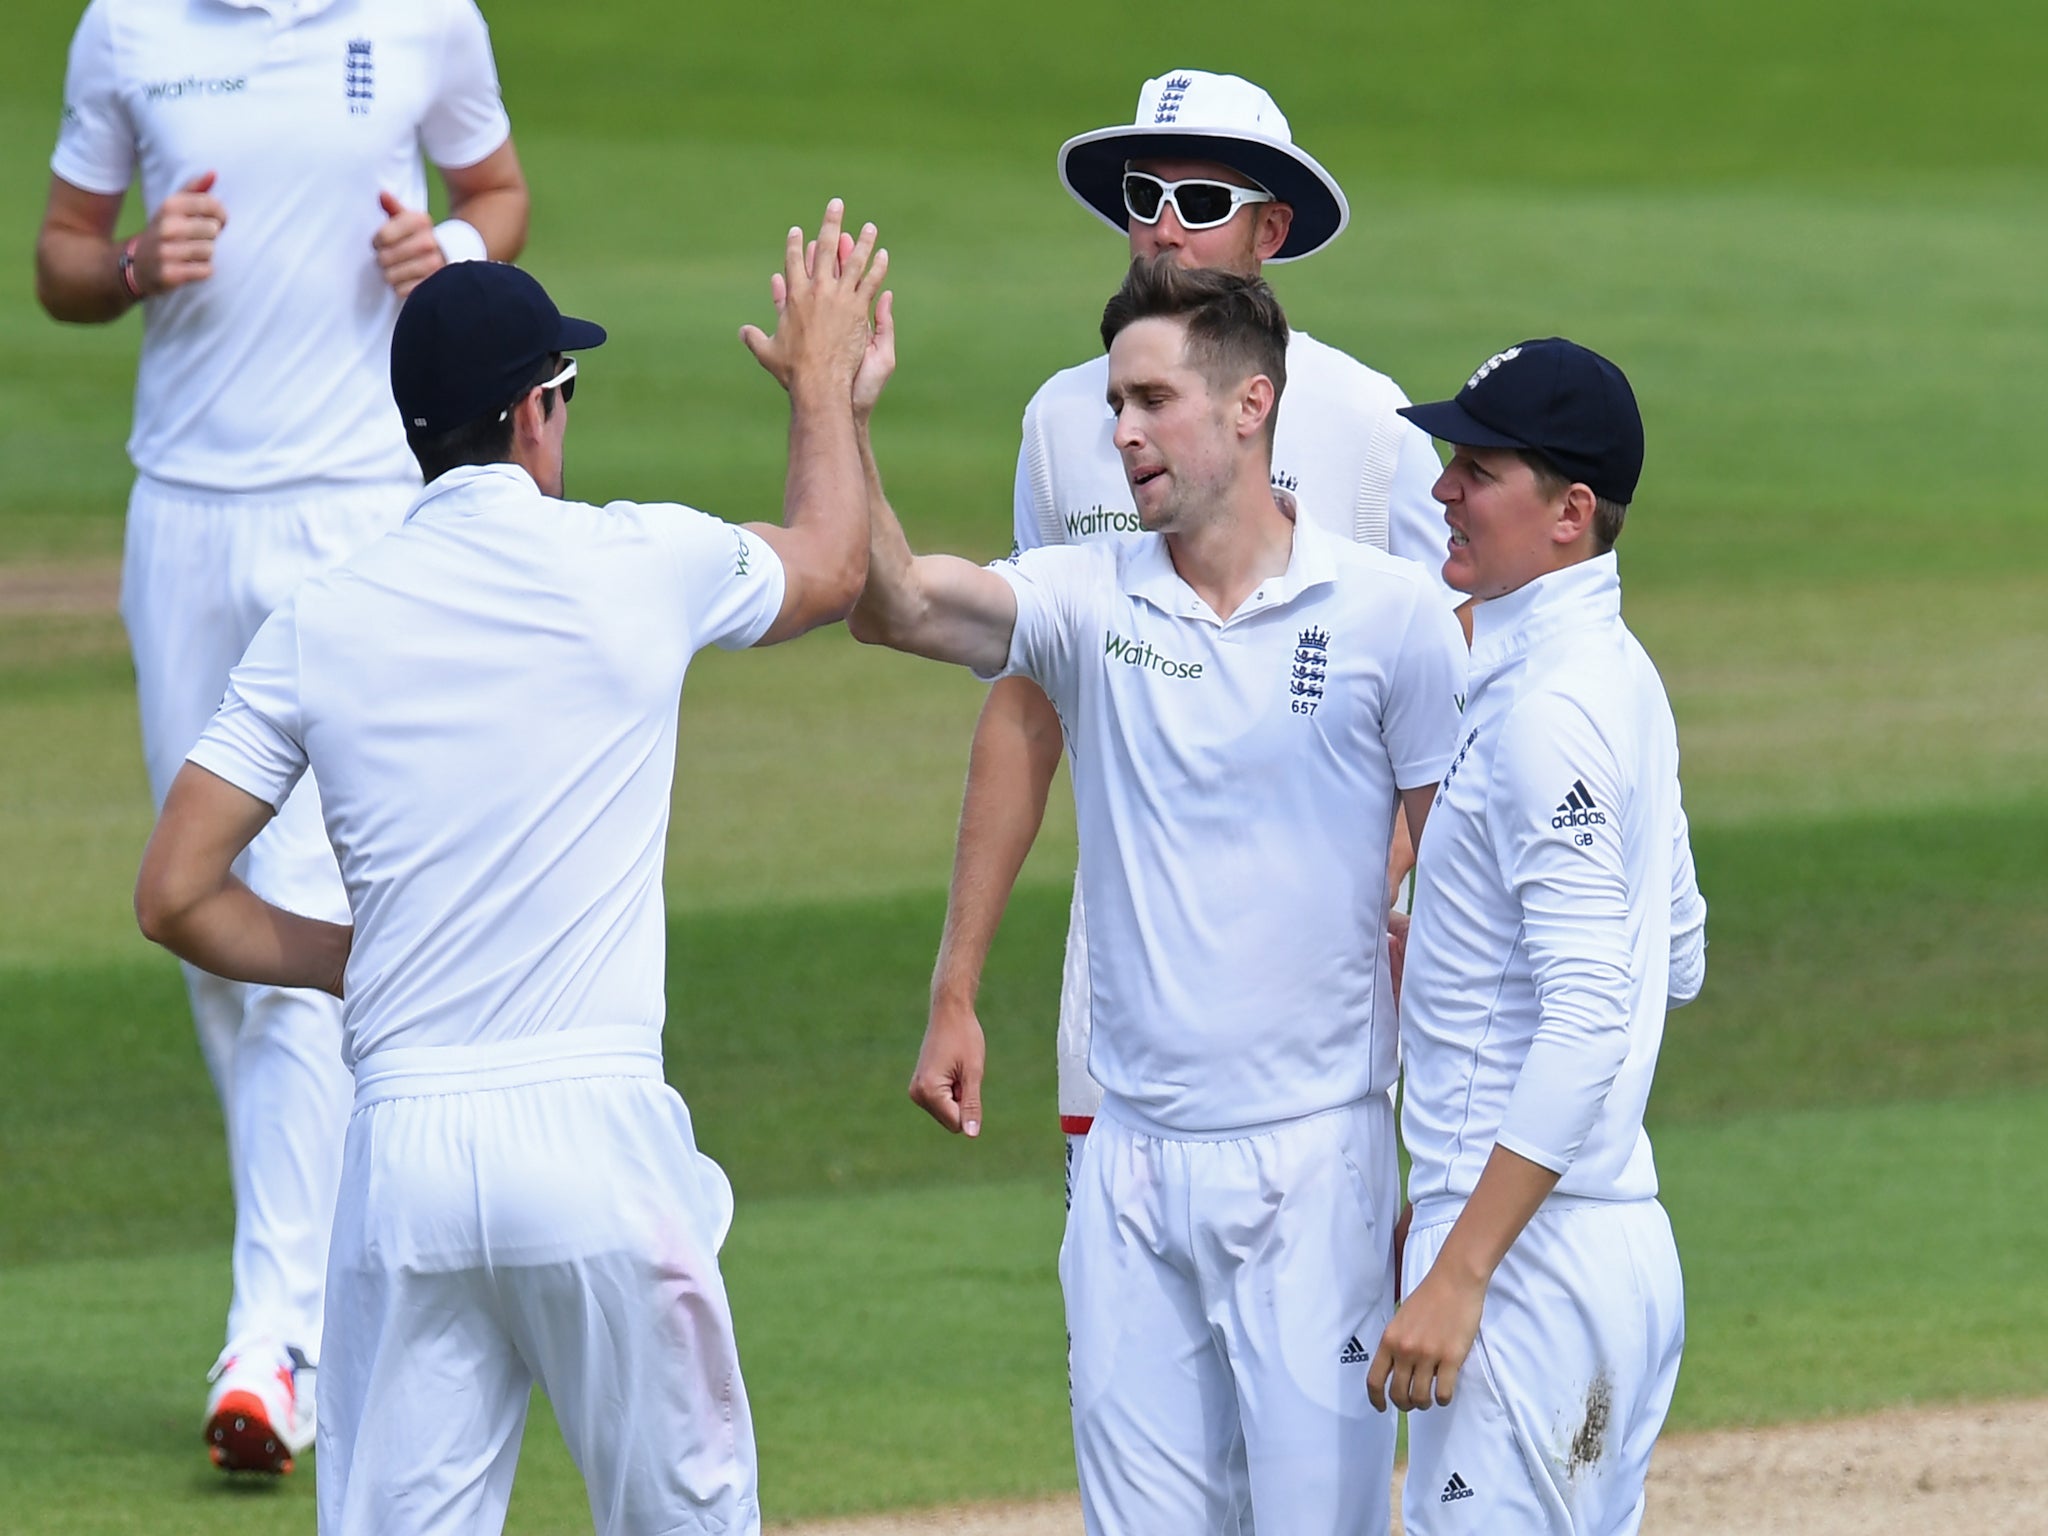 Chris Woakes is a key cog in England's winning machine